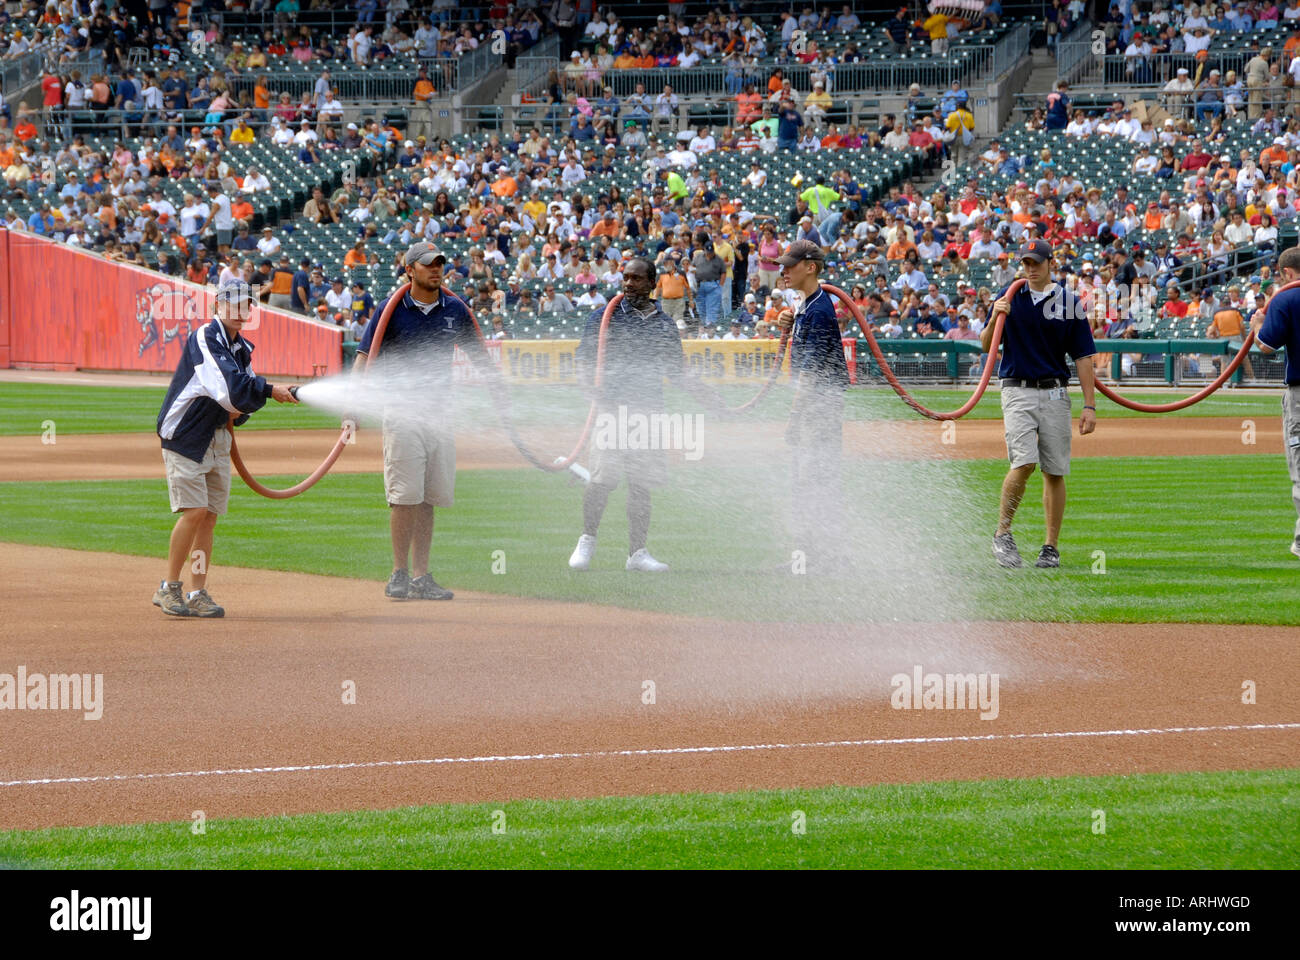 Watering or hosing down the dust on the field prior to the Detroit Tiger Professional Baseball game Stock Photo